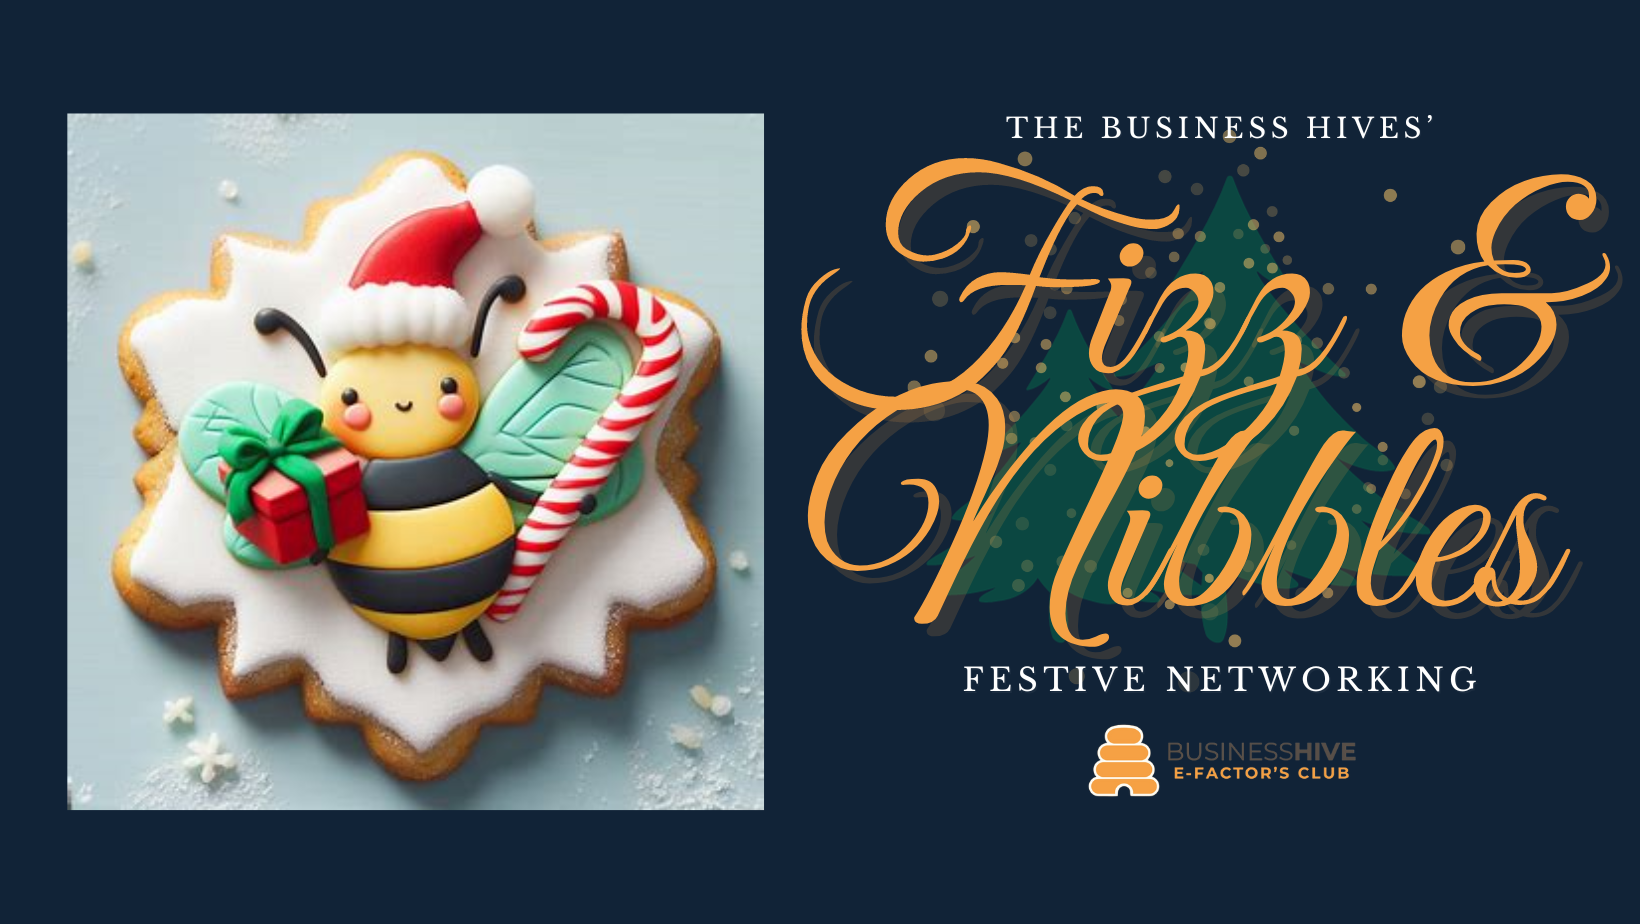 Join us for an evening of Nibbles and Fizz at our festive networking event. Don't miss out on the opportunity to connect with industry professionals and build valuable relationships. Mark your calendar for the